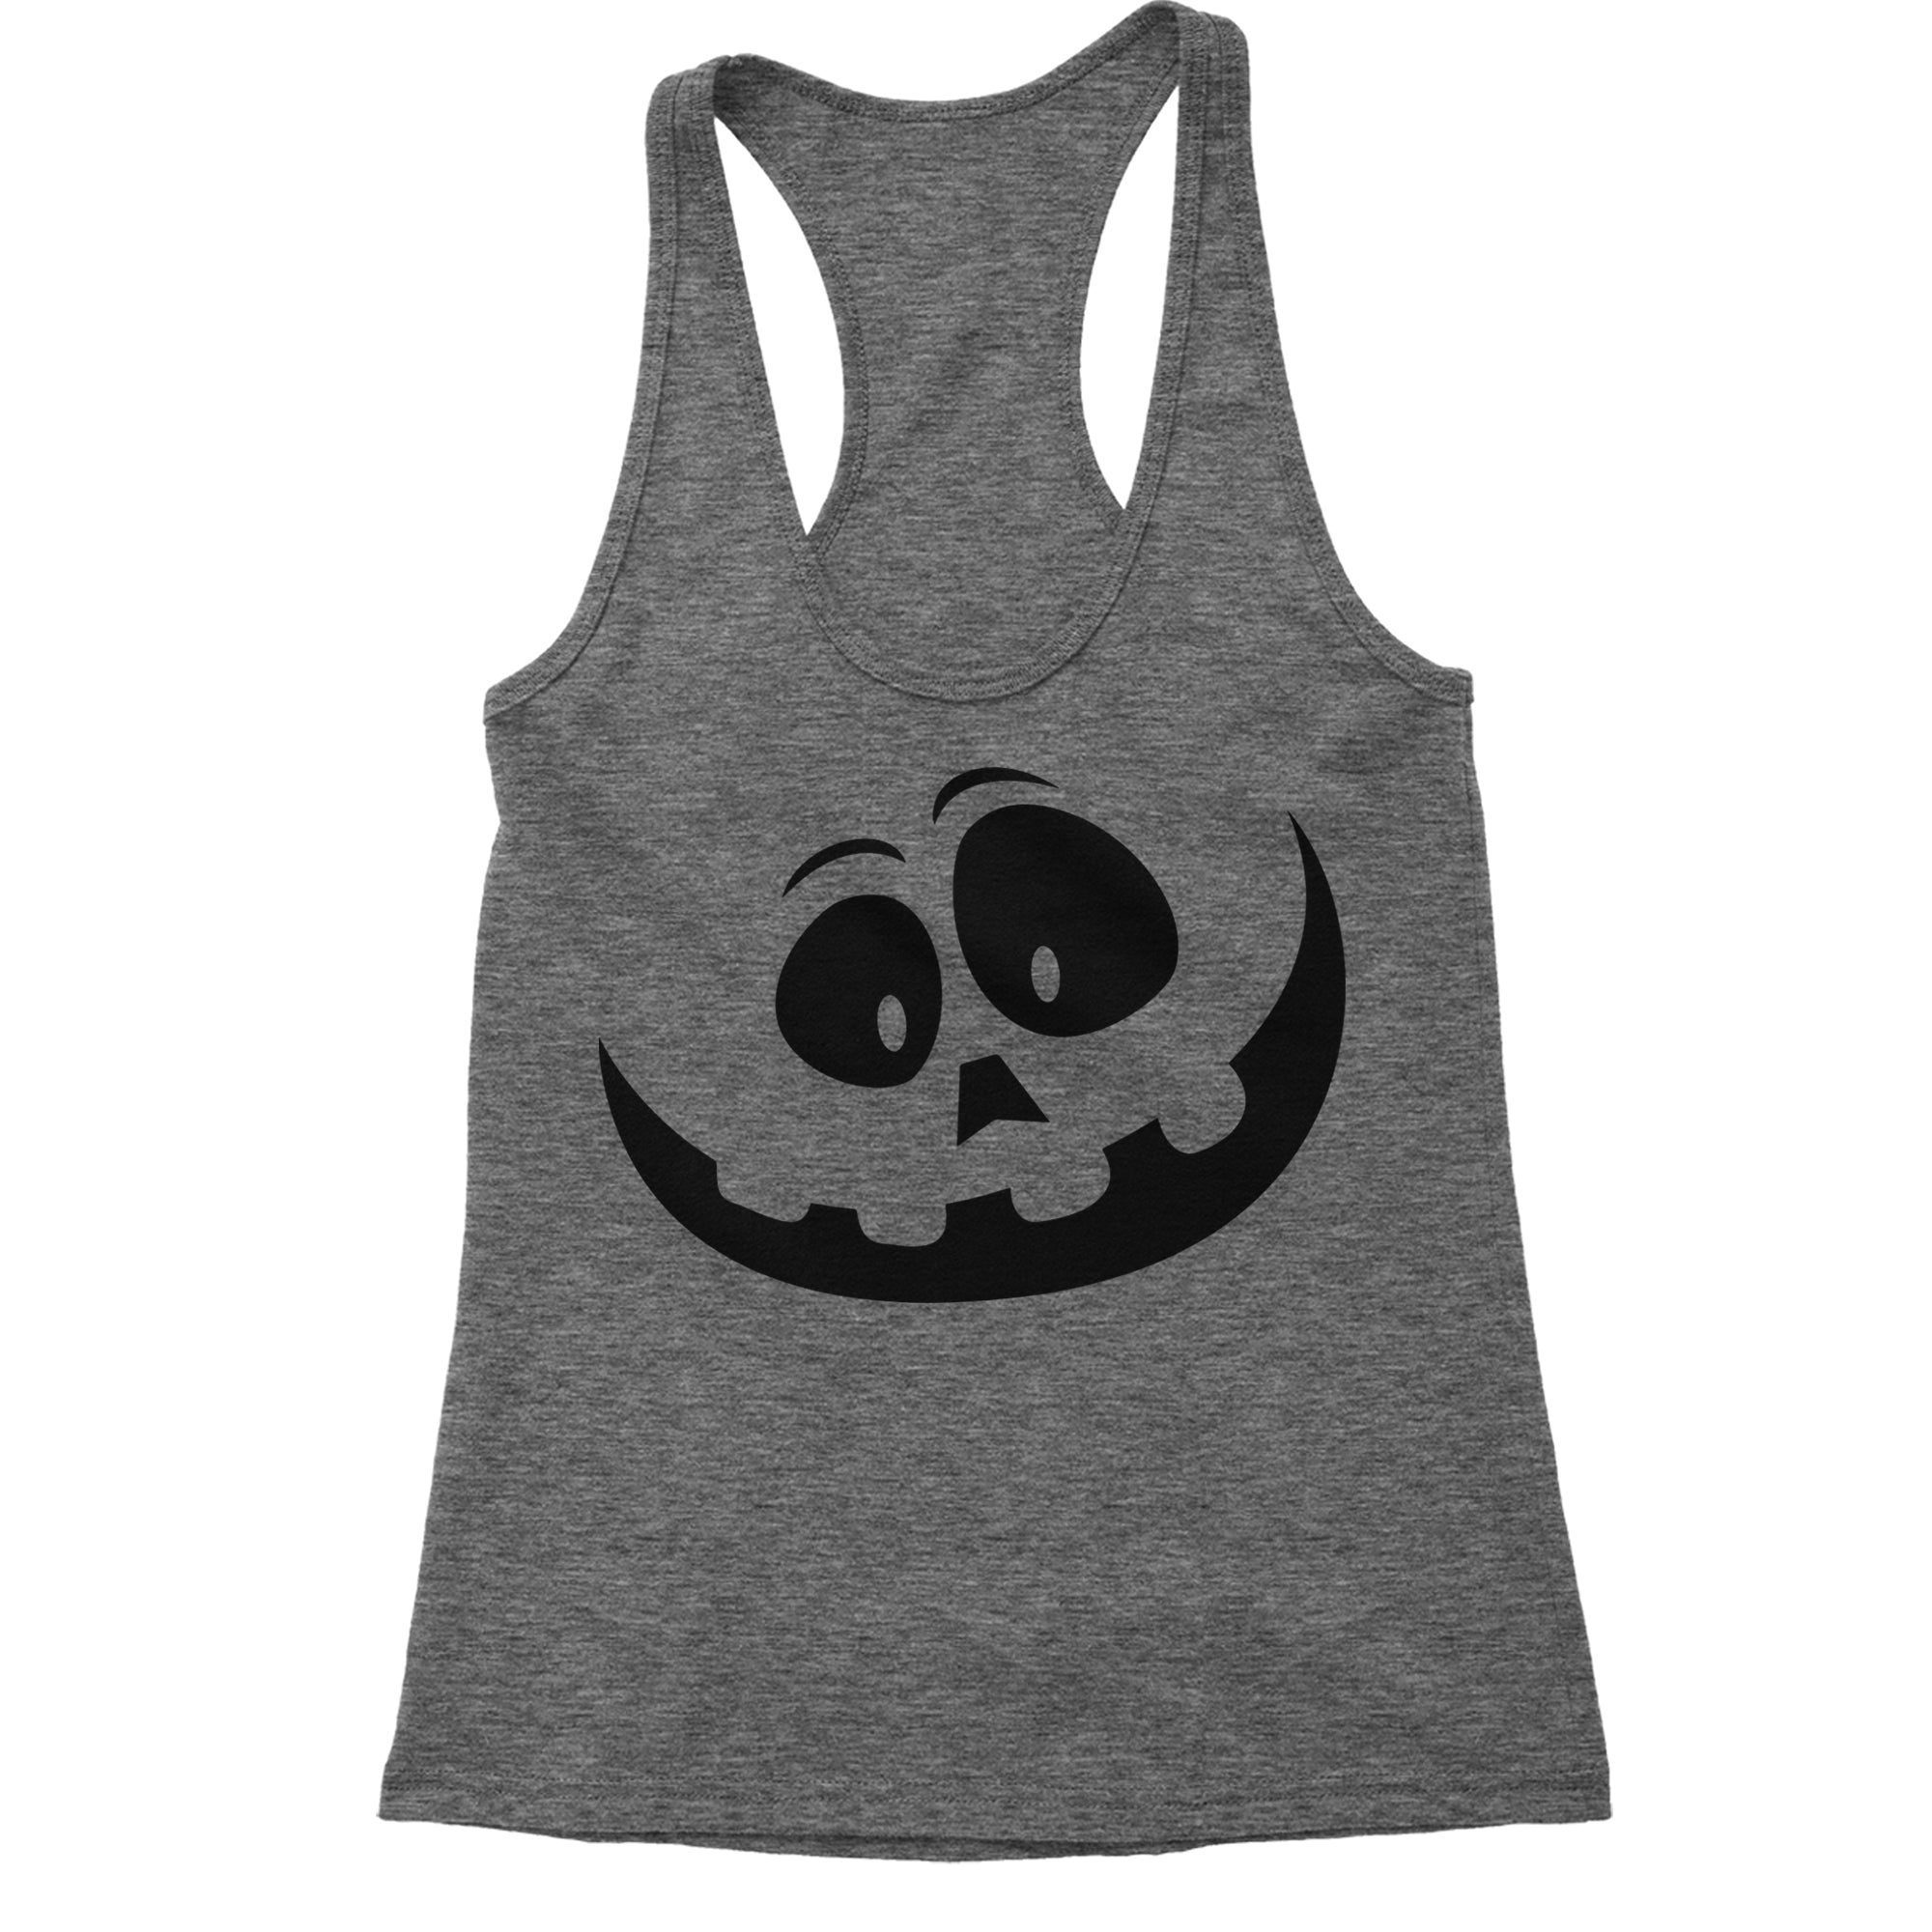 Silly Pumpkin Face (Black Print) Racerback Tank Top for Women halloween hallows eve costume dressup dress up party jackolantern by Expression Tees